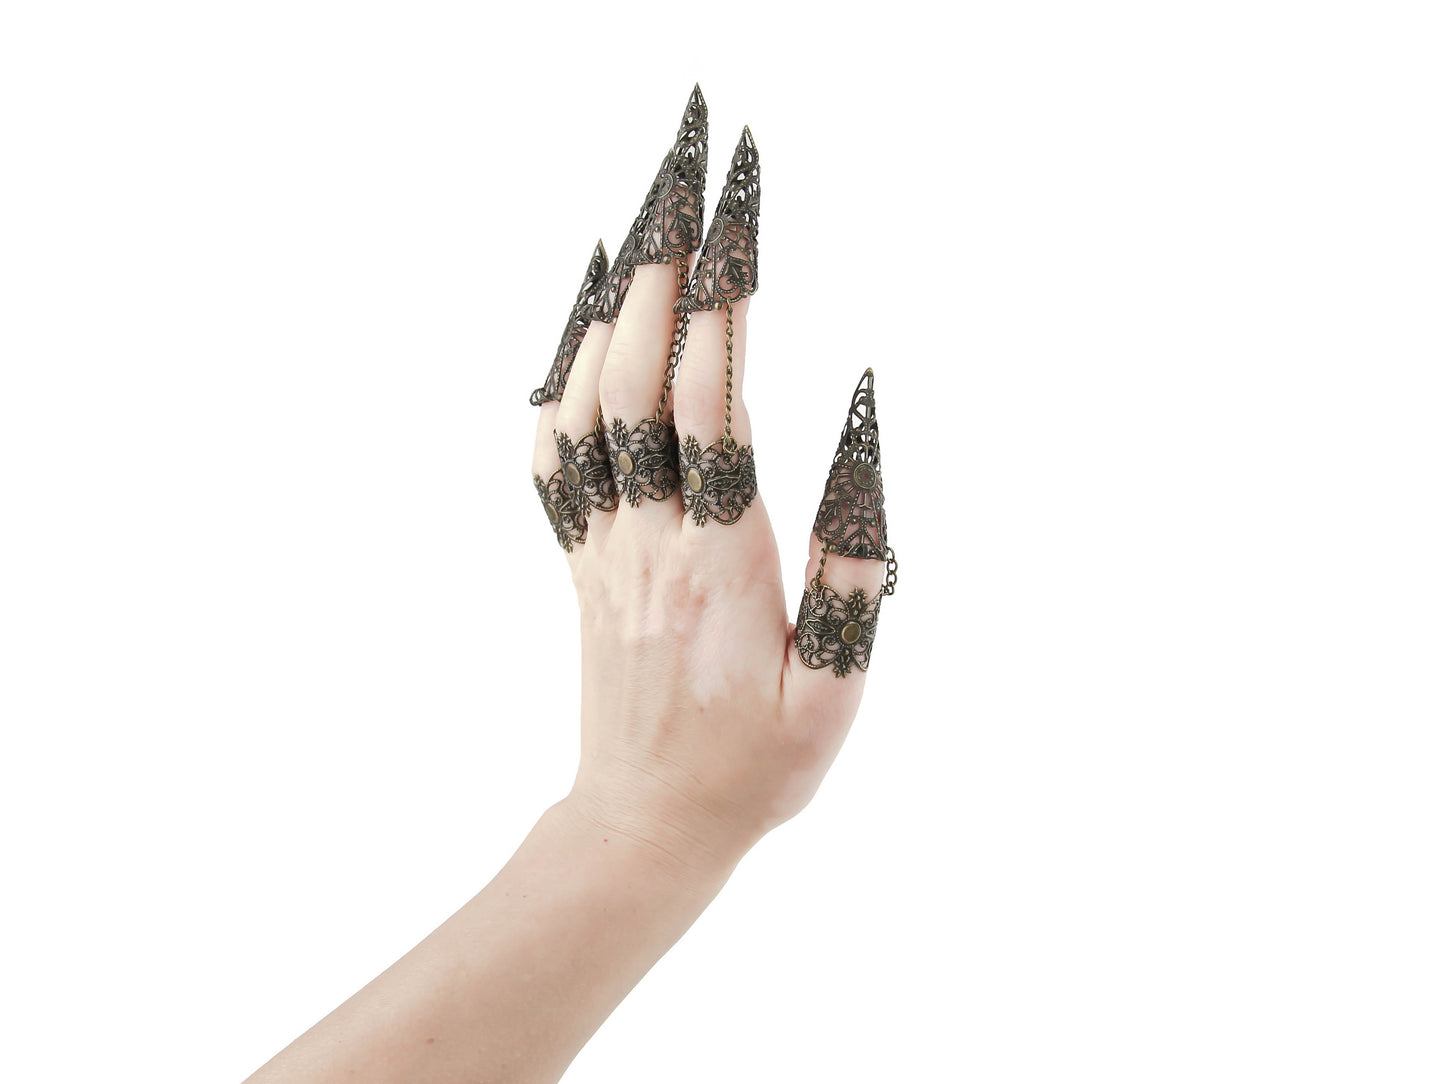 A full hand set of intricate bronze claw rings from Myril Jewels, capturing the spirit of neo-goth fashion for a dramatic statement. These lavish rings are ideal for Halloween, aligning with the punk and gothic-chic vibe, and versatile enough for everyday wear. Perfect for those who favor witchcore or whimsigoth styles, they're a bold choice for rave parties, festivals, or as a daring goth girlfriend gift.